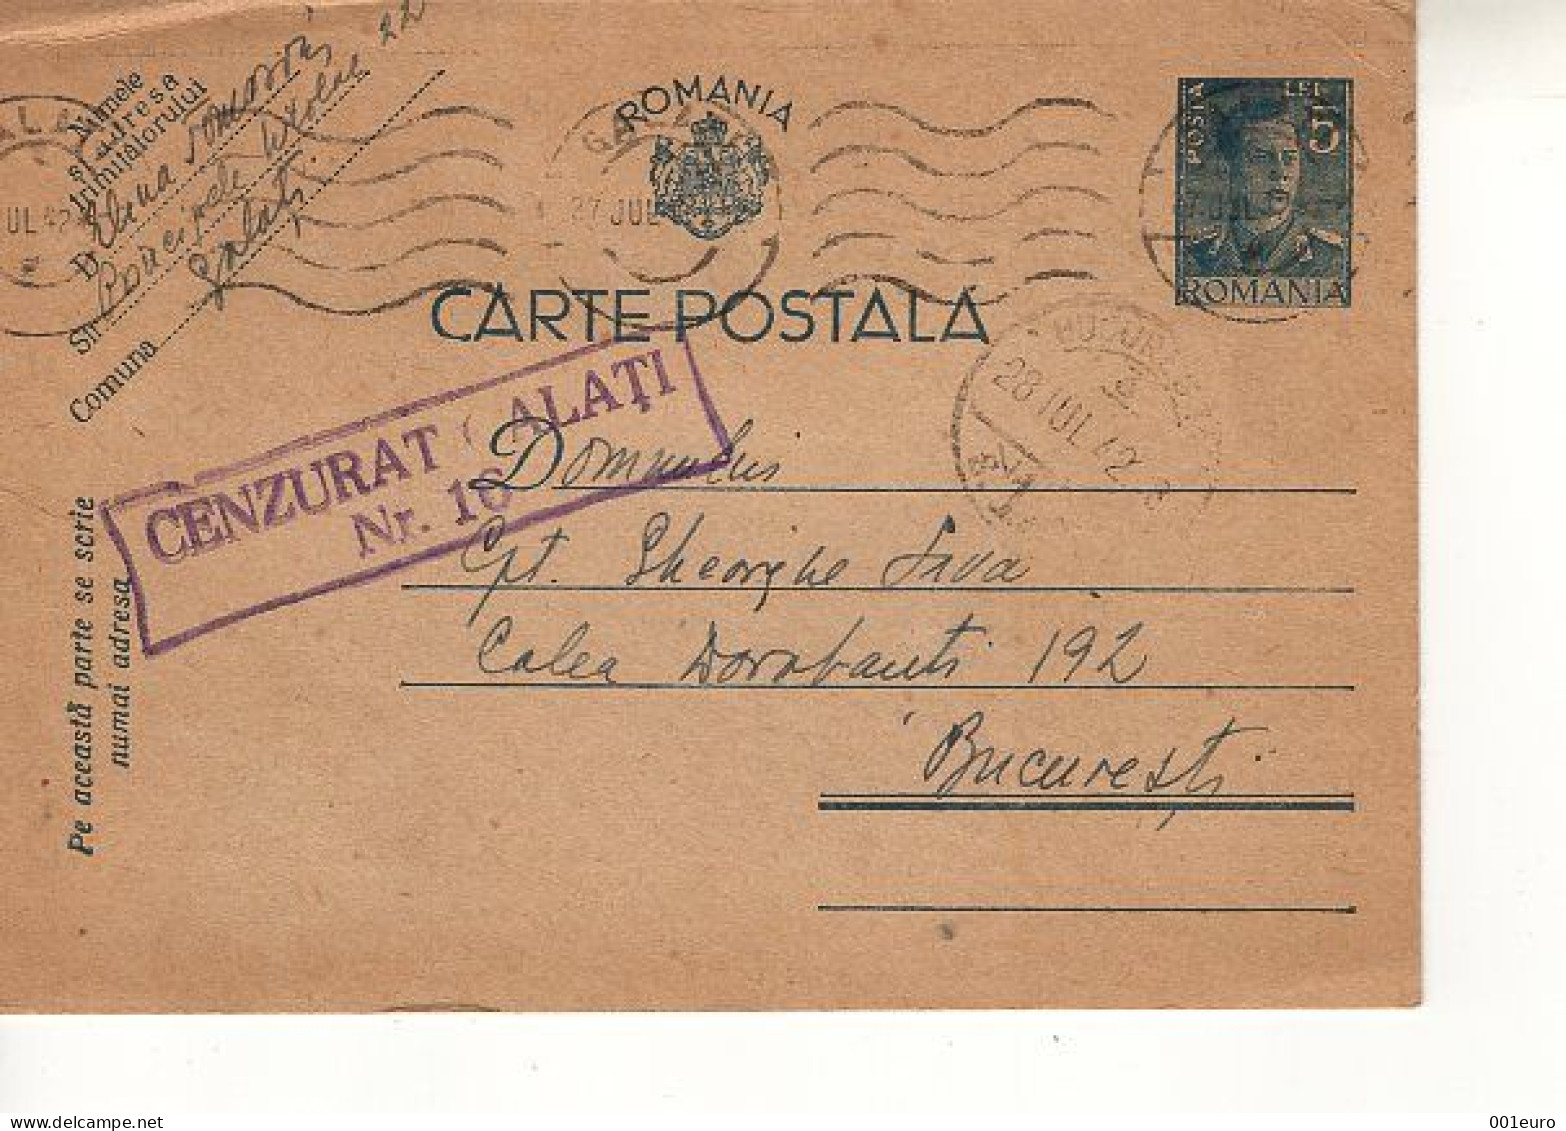 ROMANIA 1942: CENSORED MAIL, Used Prepaid Postal Stationery Card - Registered Shipping! - Postal Stationery